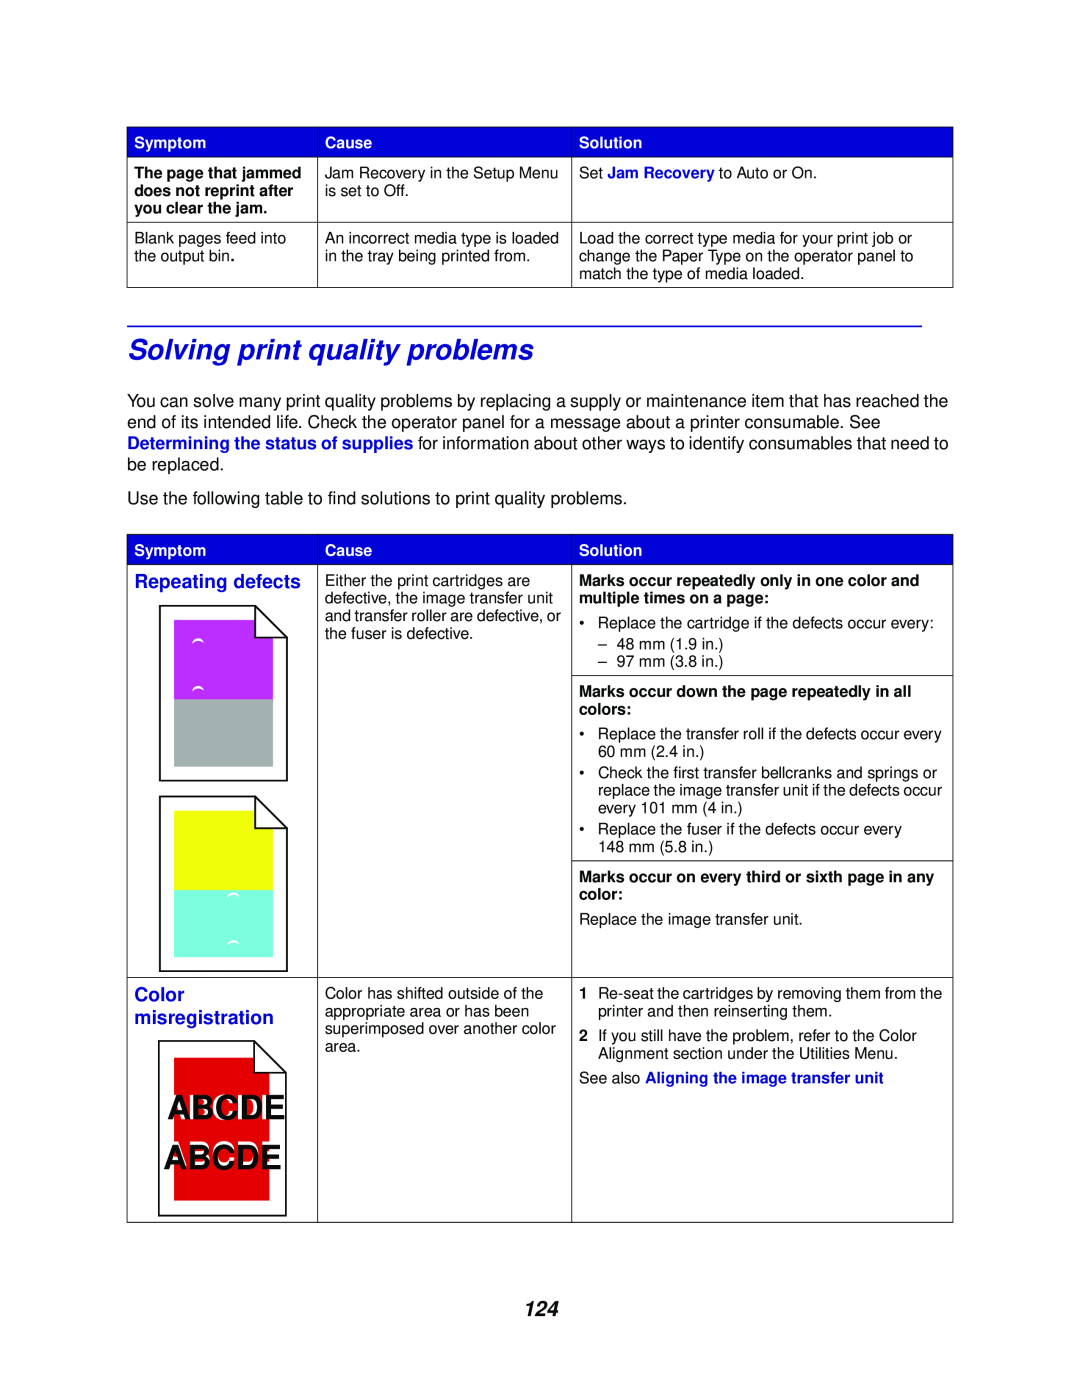 Lexmark 762 manual Solving print quality problems, Abcde 